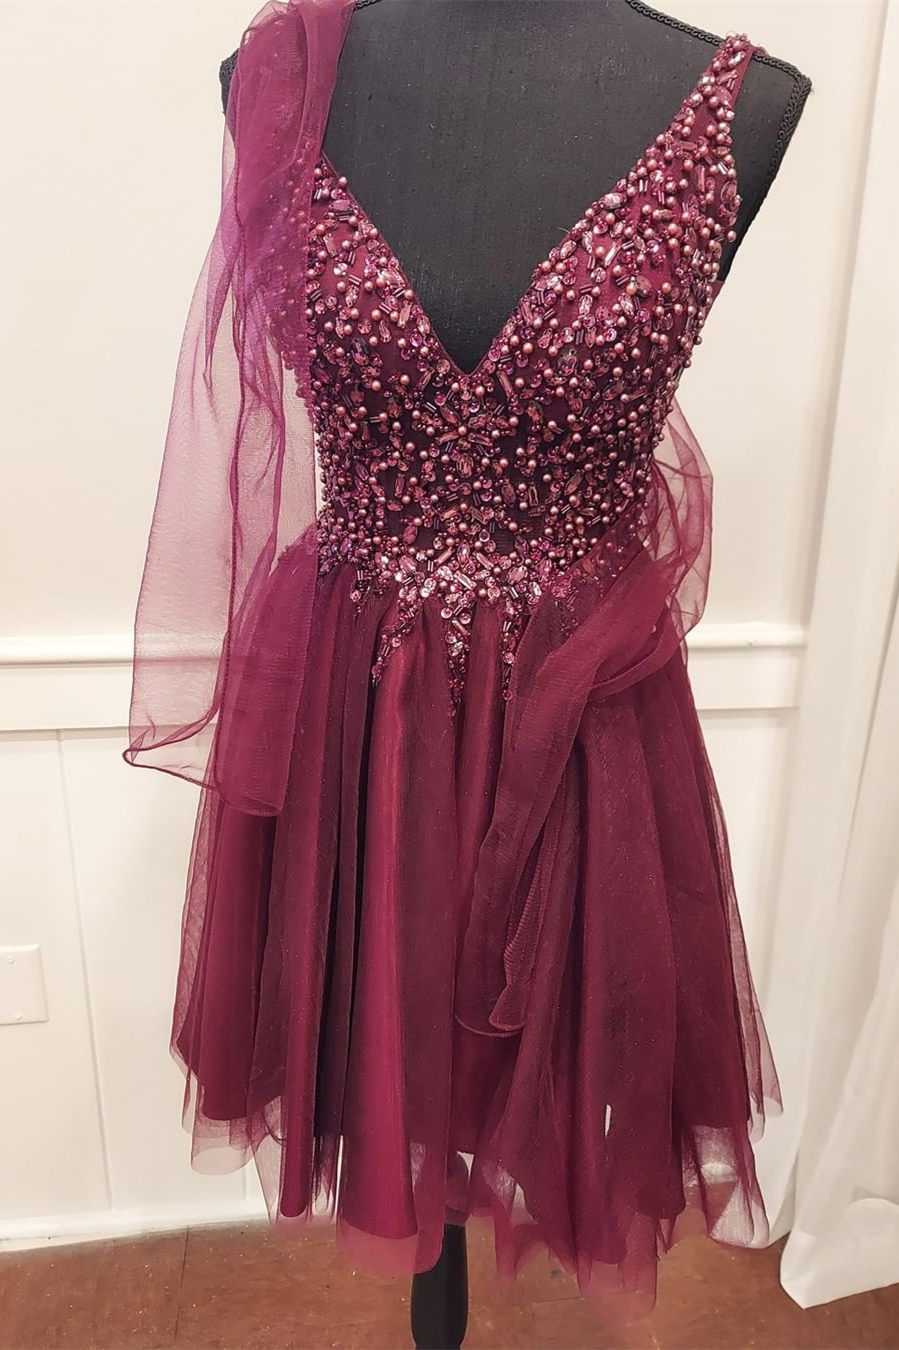 A-Line Burgundy Beaded Tie-Back Corset Homecoming Dress outfit, Prom Dresses For Curvy Figures